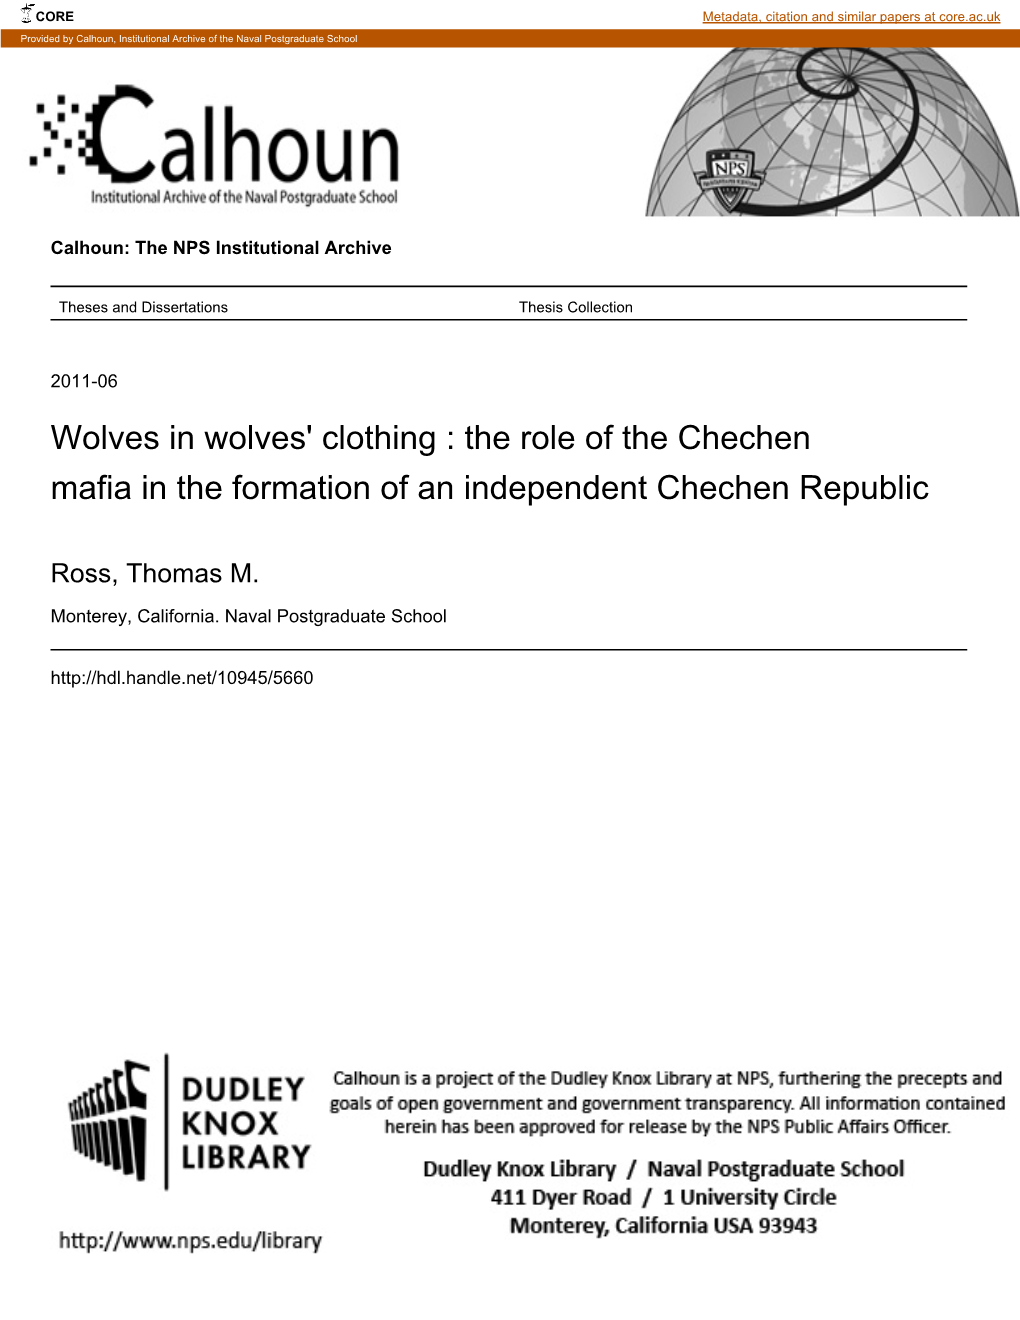 Wolves in Wolves' Clothing : the Role of the Chechen Mafia in the Formation of an Independent Chechen Republic